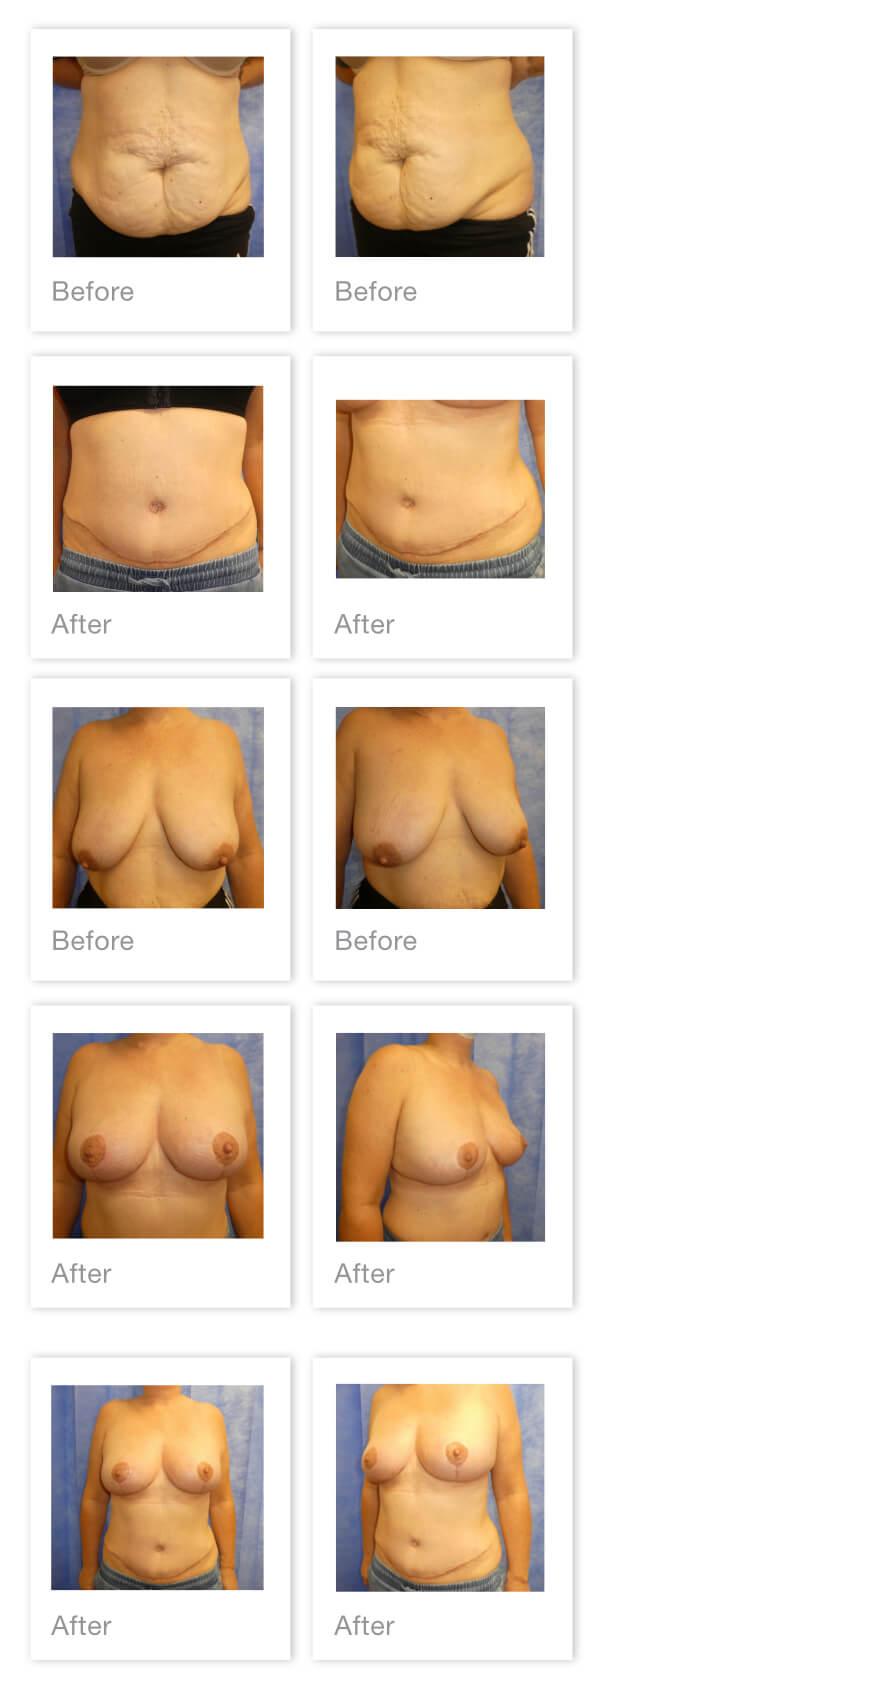 David Oliver Abdominoplasty & Mastopexy Surgery Before After Exeter, Devon - May 2022